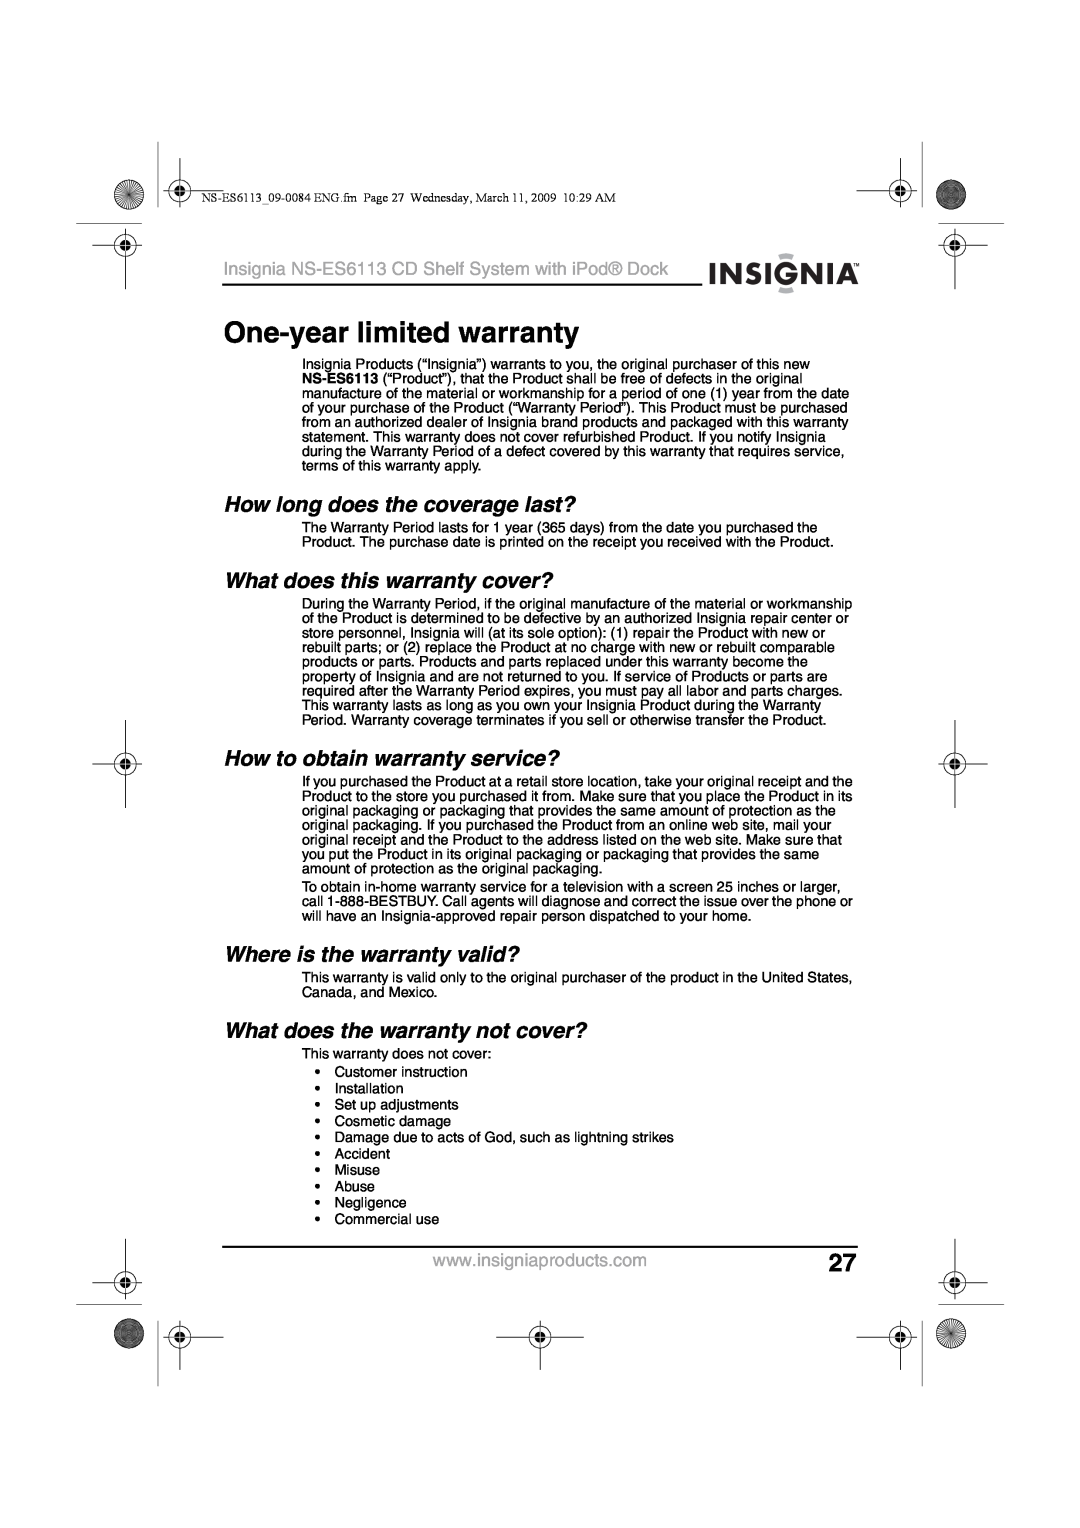 Insignia NS-ES6113 manual One-yearlimited warranty, How long does the coverage last?, What does this warranty cover? 